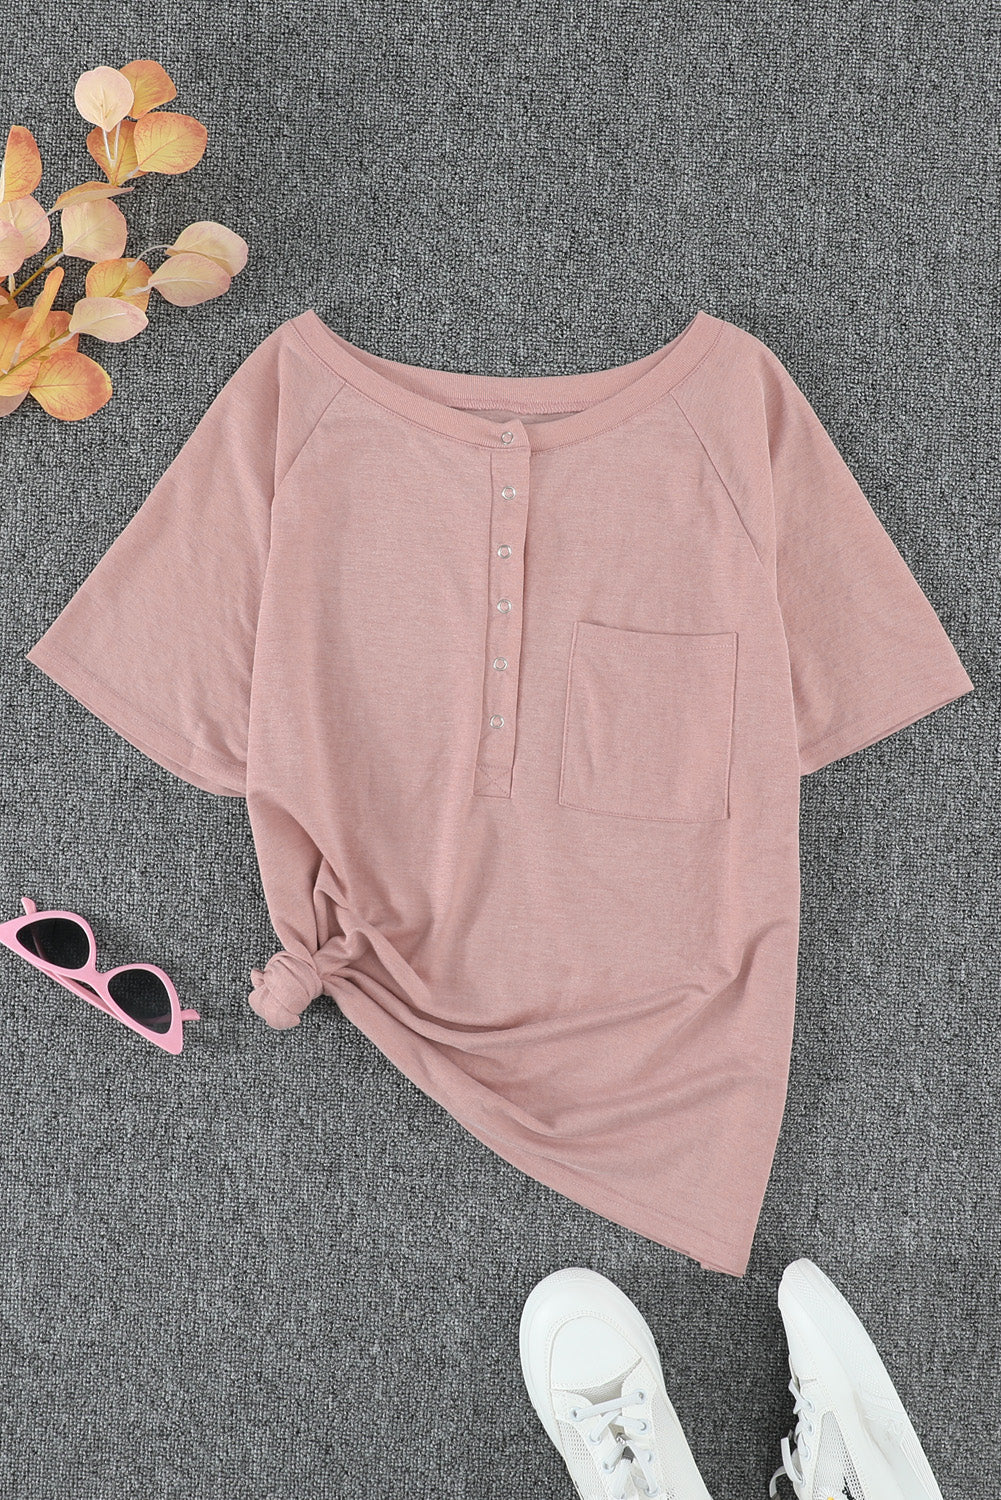 Snap Button Pocketed Short Sleeve Tee